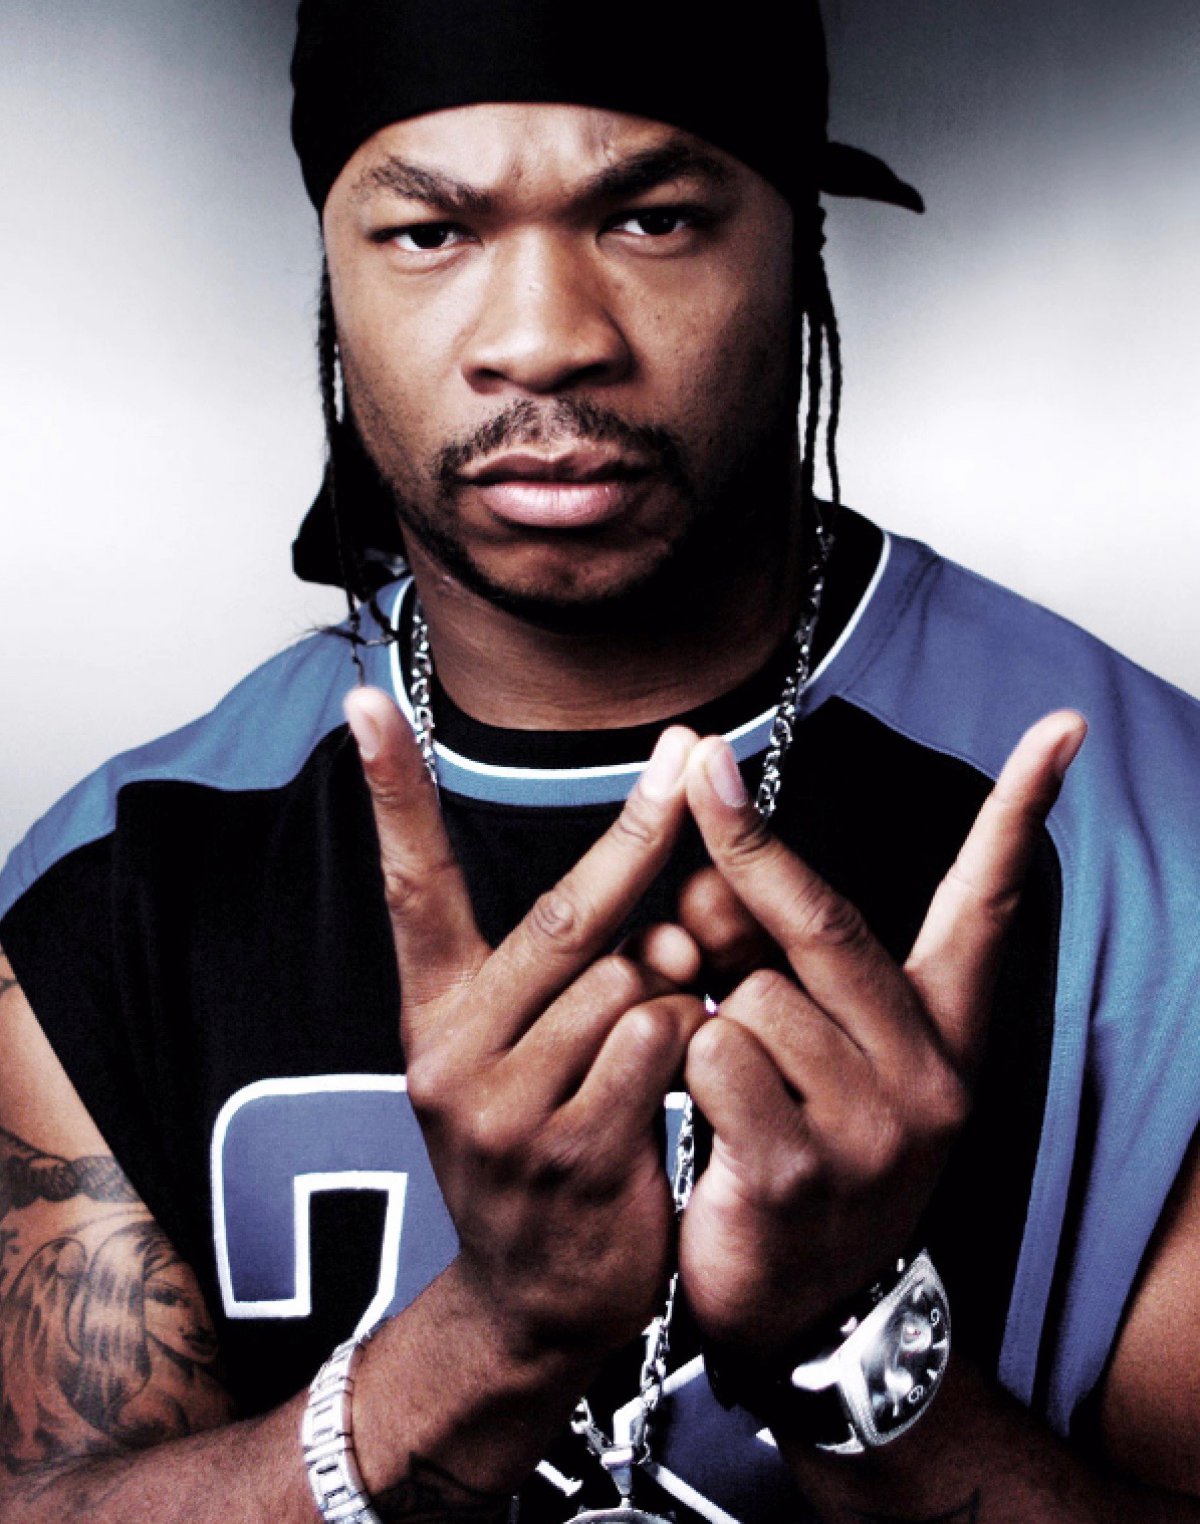 Xzibit to guest star in upcoming episode of new 'Detroit 1-8-7' drama - Reality TV World